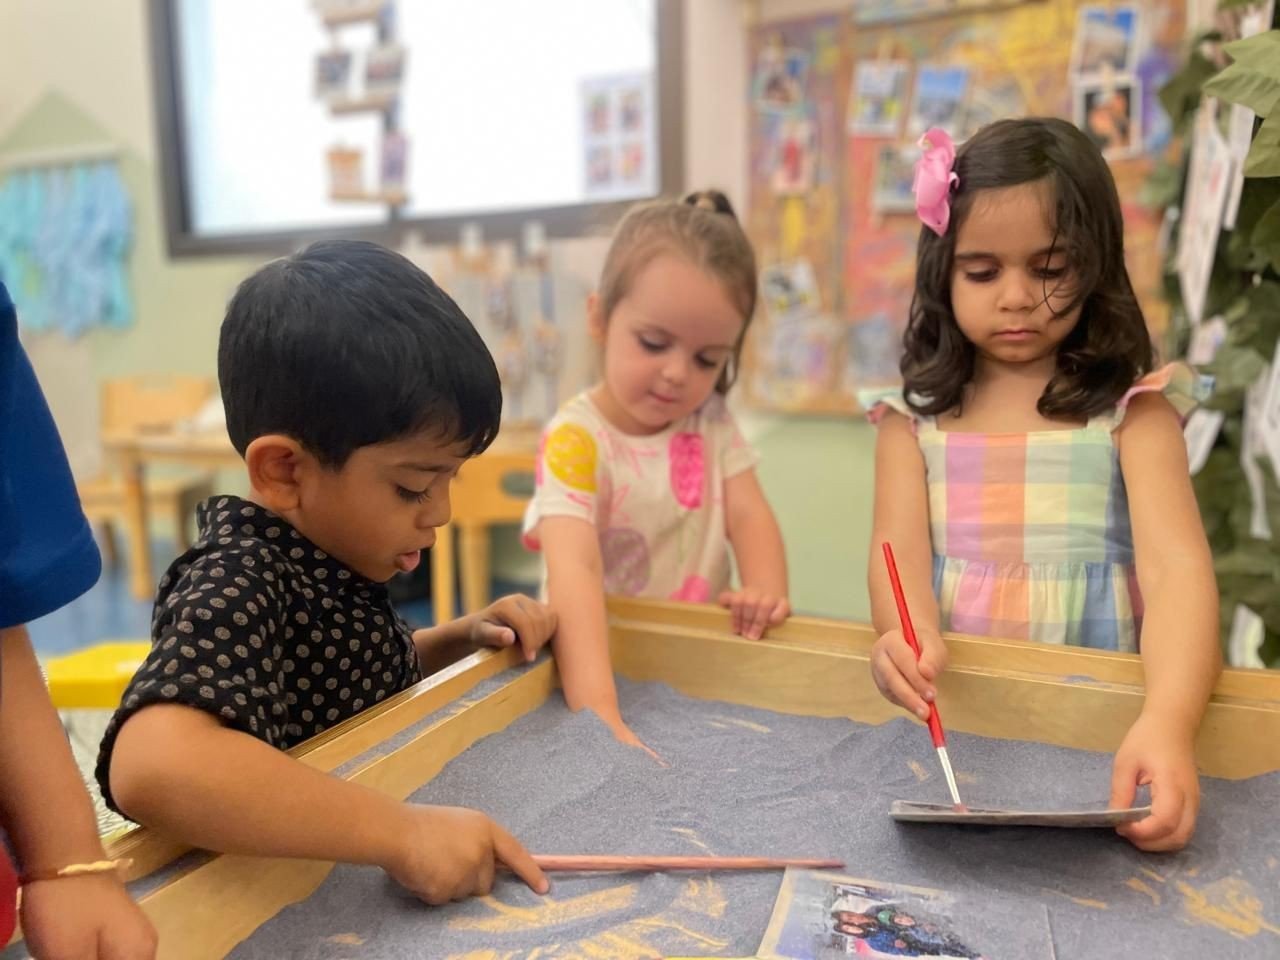 Family Picture Treasure Hunt - what fun way to find our pictures! Seeing their pictures in the classroom not only fosters a sense of belonging among the children but also initiates conversations either among the children themselves or with adults.⁠
⁠